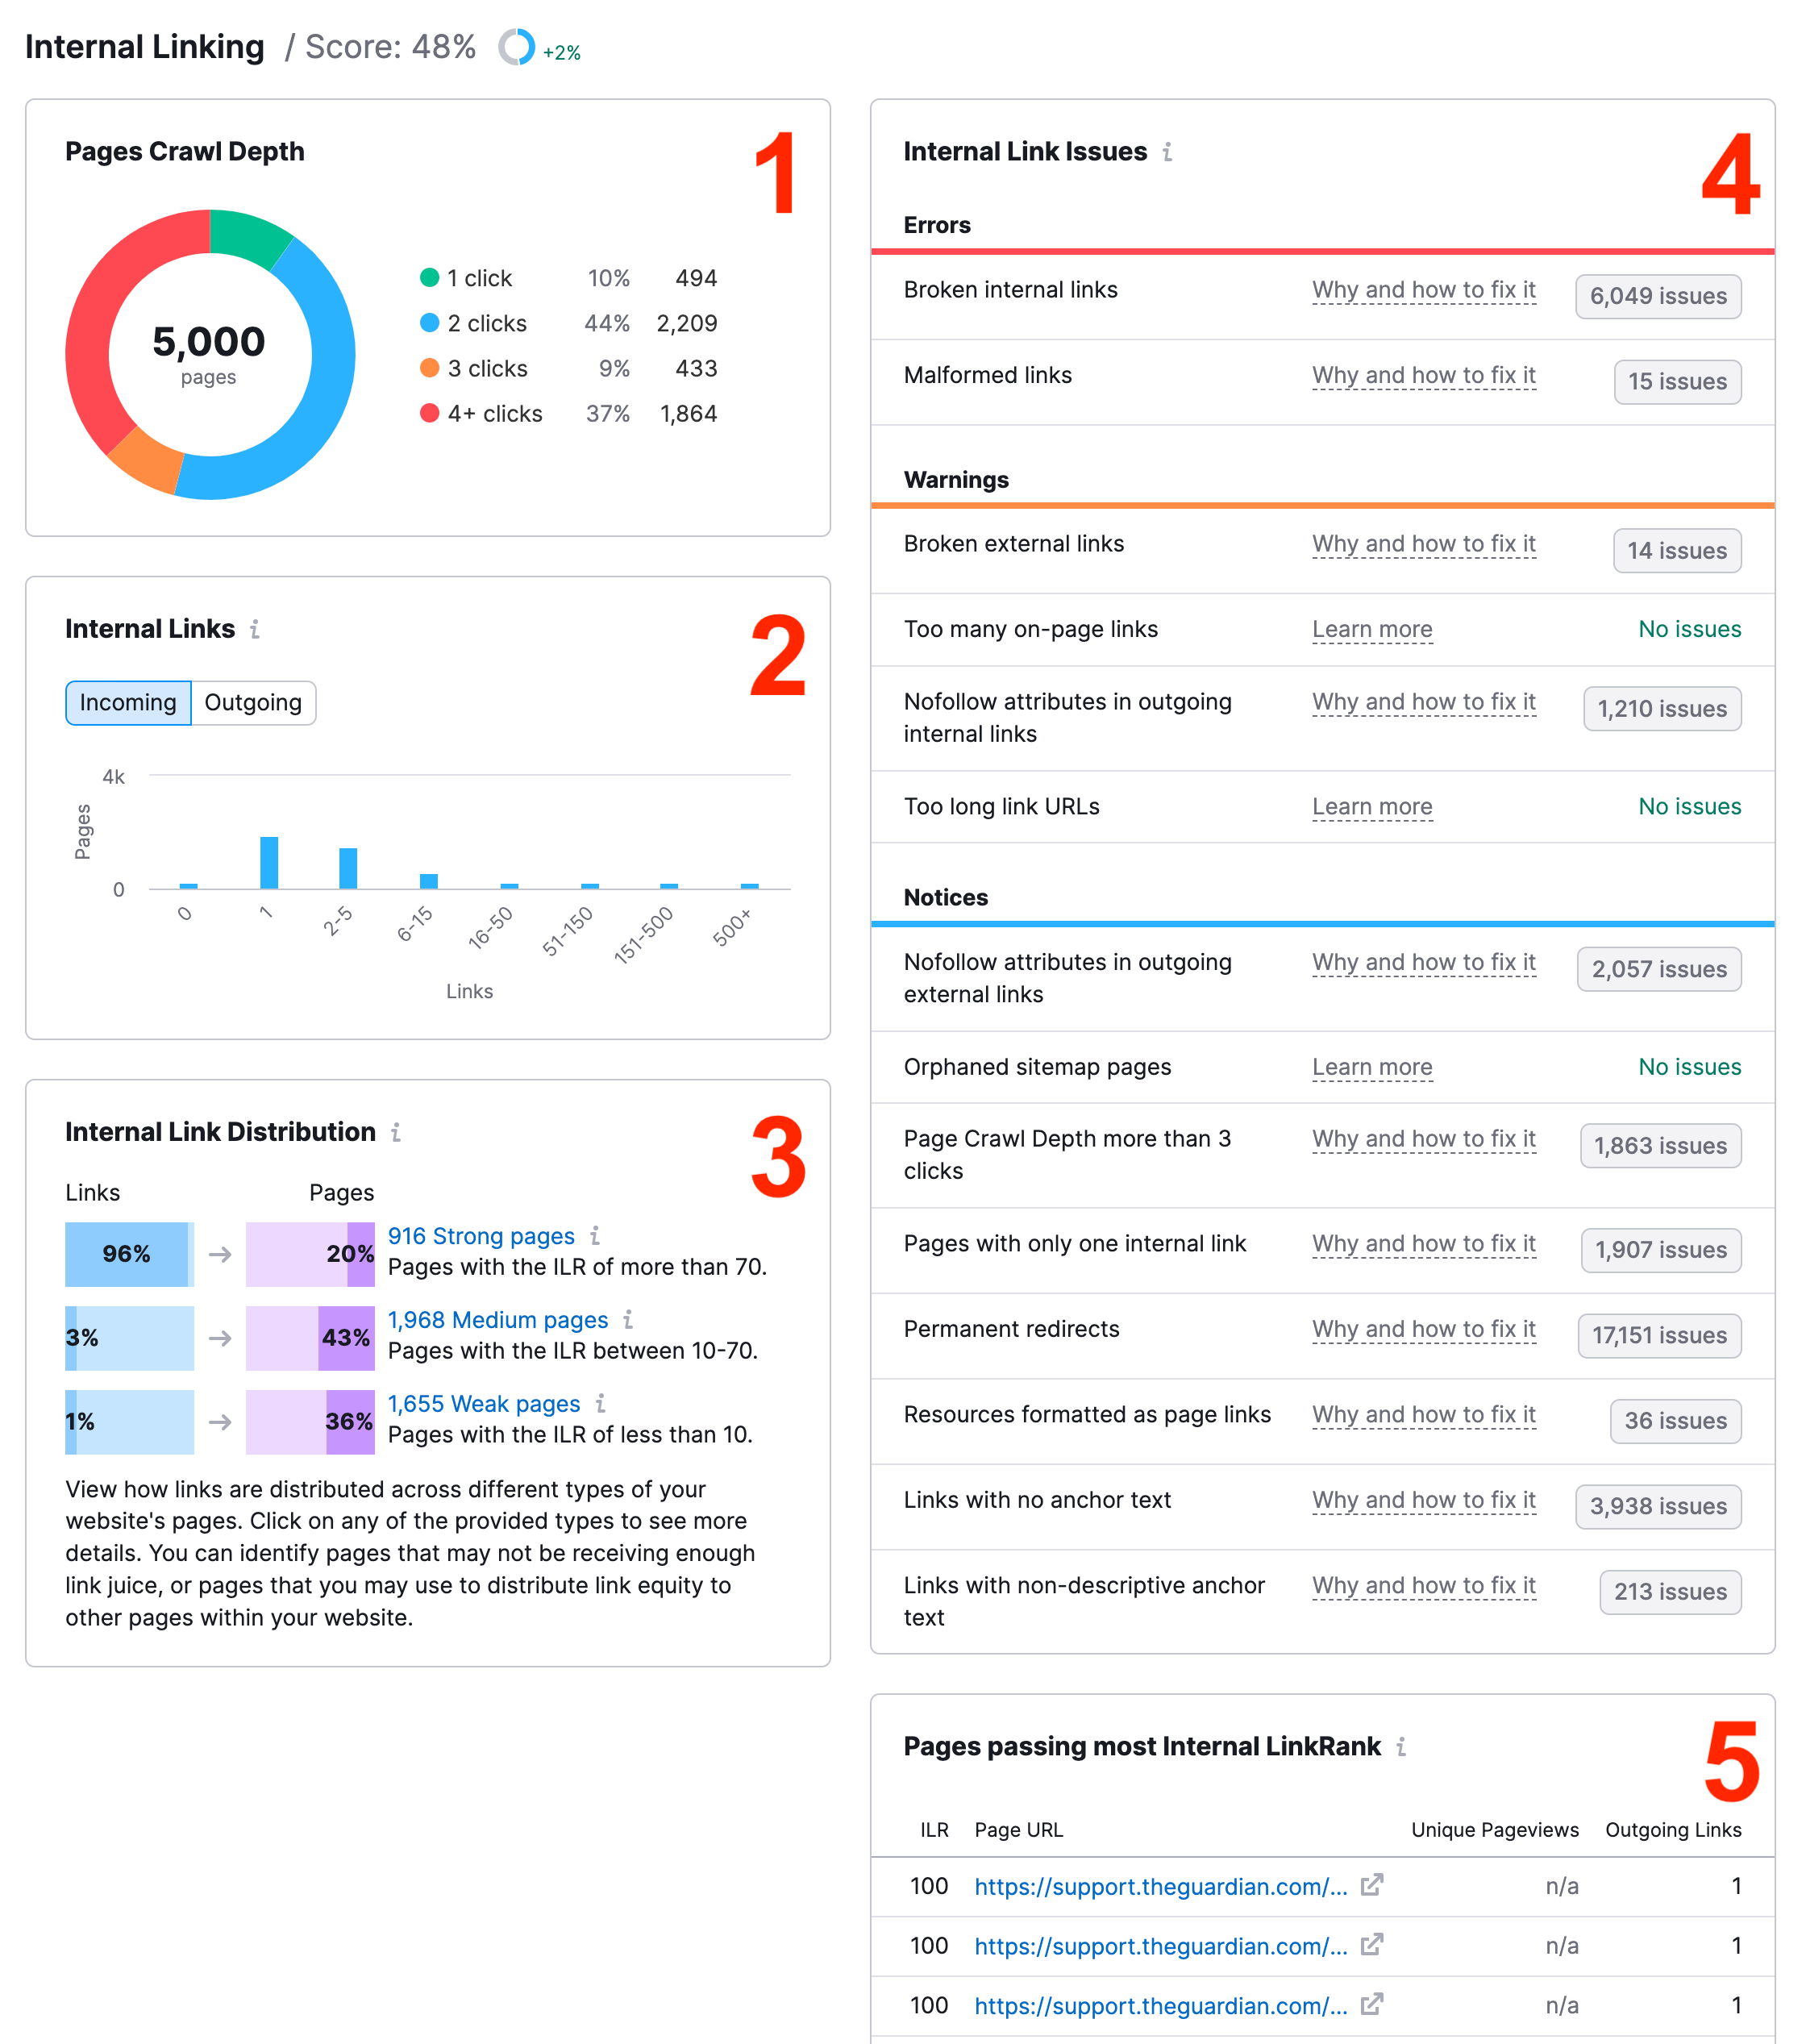 Internal Linking thematic report from Site Audit. Each widget presented has its own number: 1 for Pages Crawl Depth, 2 for Internal Links, 3 for Internal Link Distribution, 4 for Internal Link Issues, and 5 for Pages passing most Internal LinkRank.